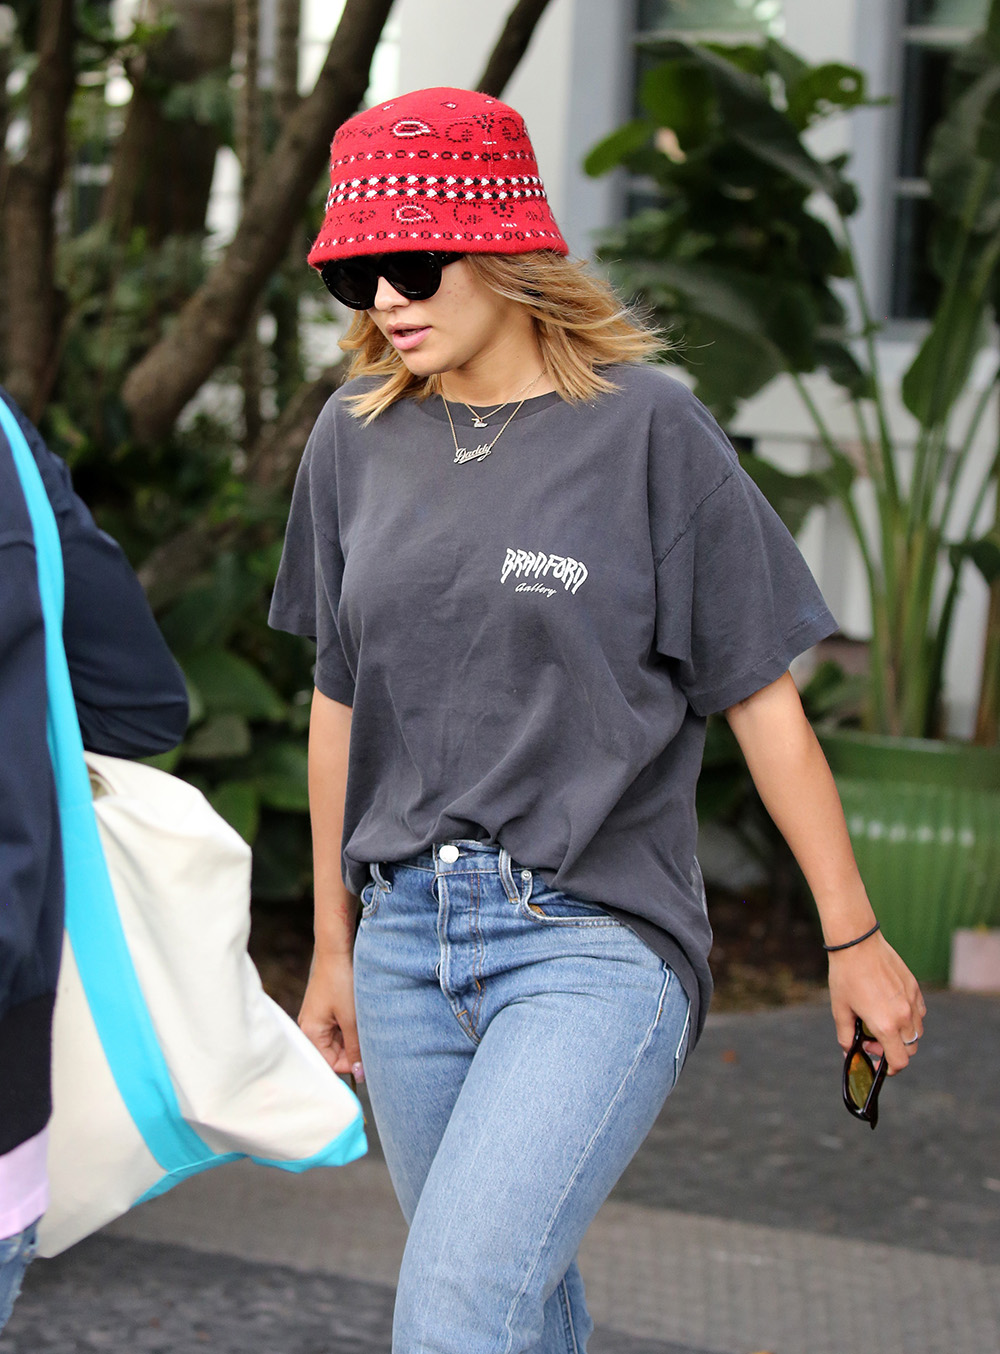 Rita Ora rocks a Louis Vuitton hoodie with black crop top and